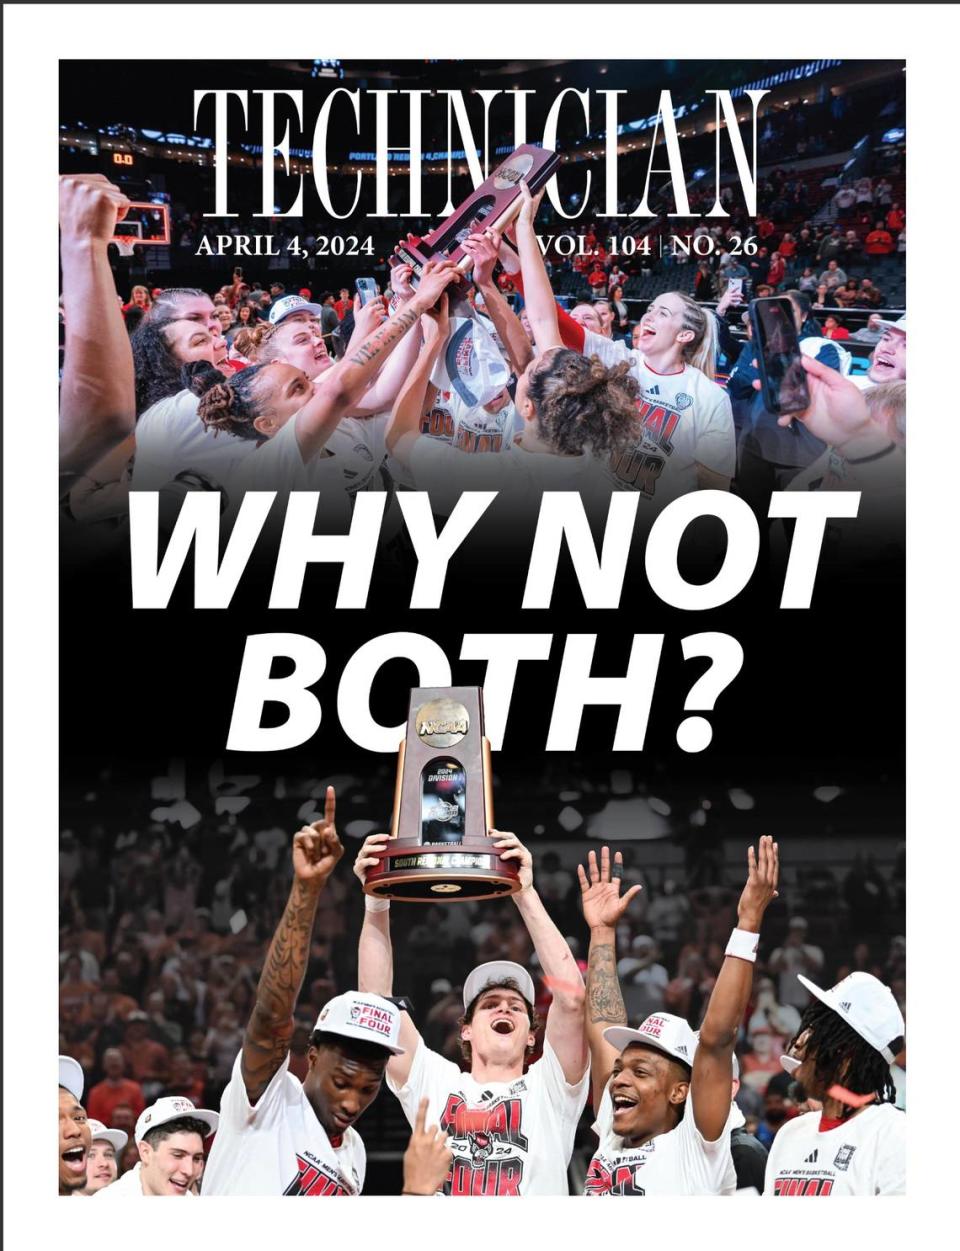 The April 4 cover of “Technician”, the student newspaper at NC State.